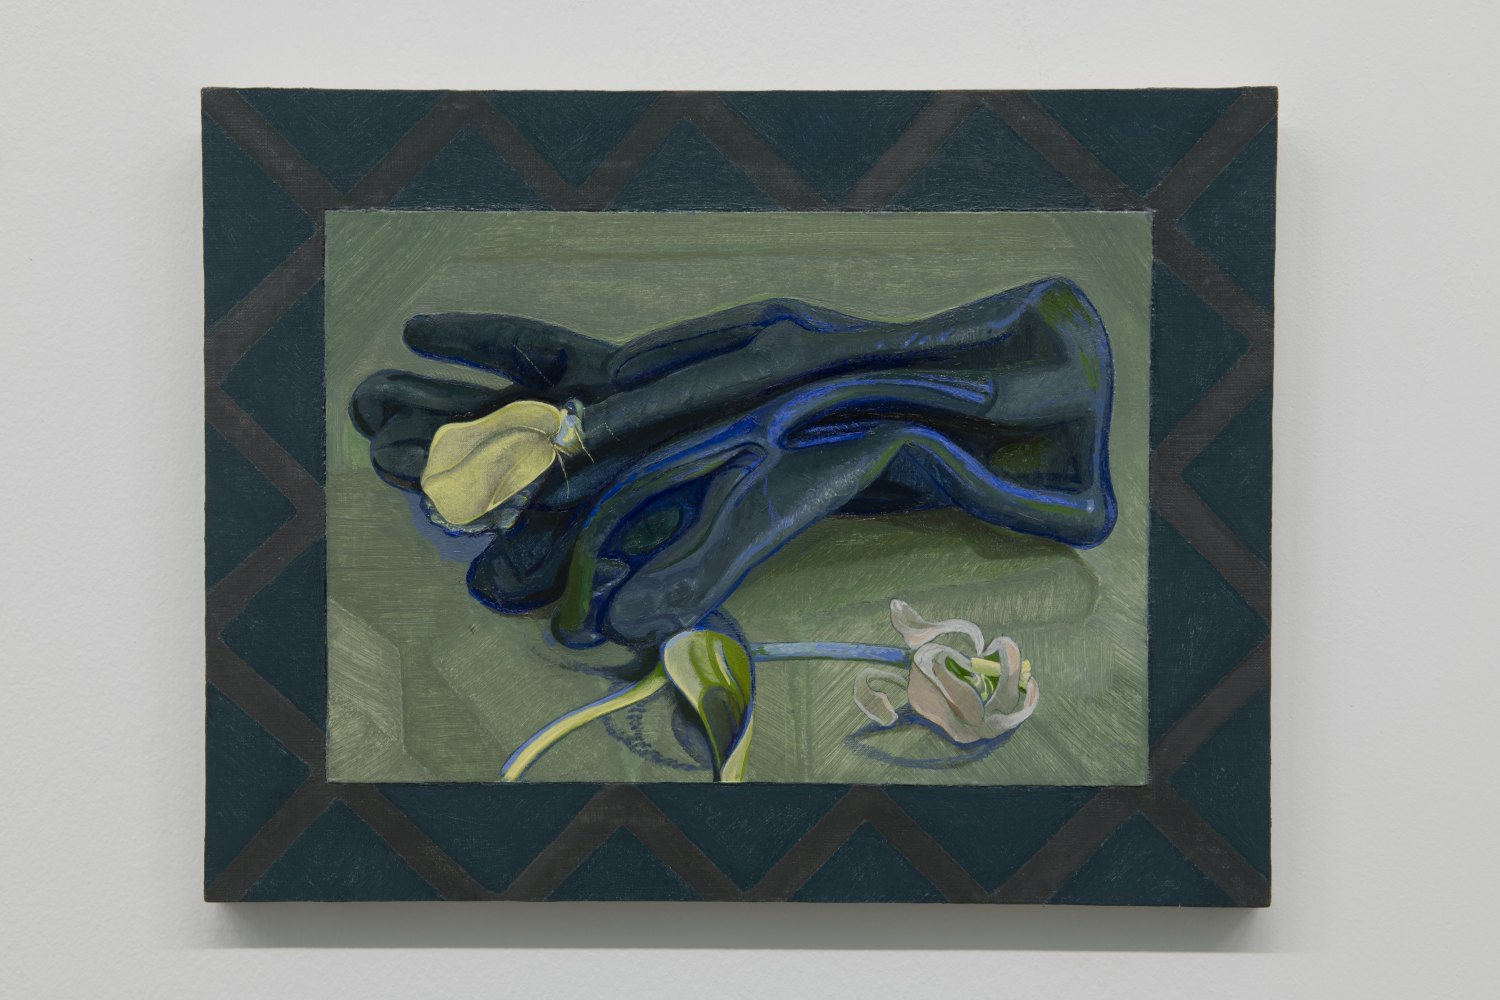 Victor Man Blue Gloves and Yellow Moth, 2020 Oil on canvas mounted on wood, 34.1 x 44.7 cm